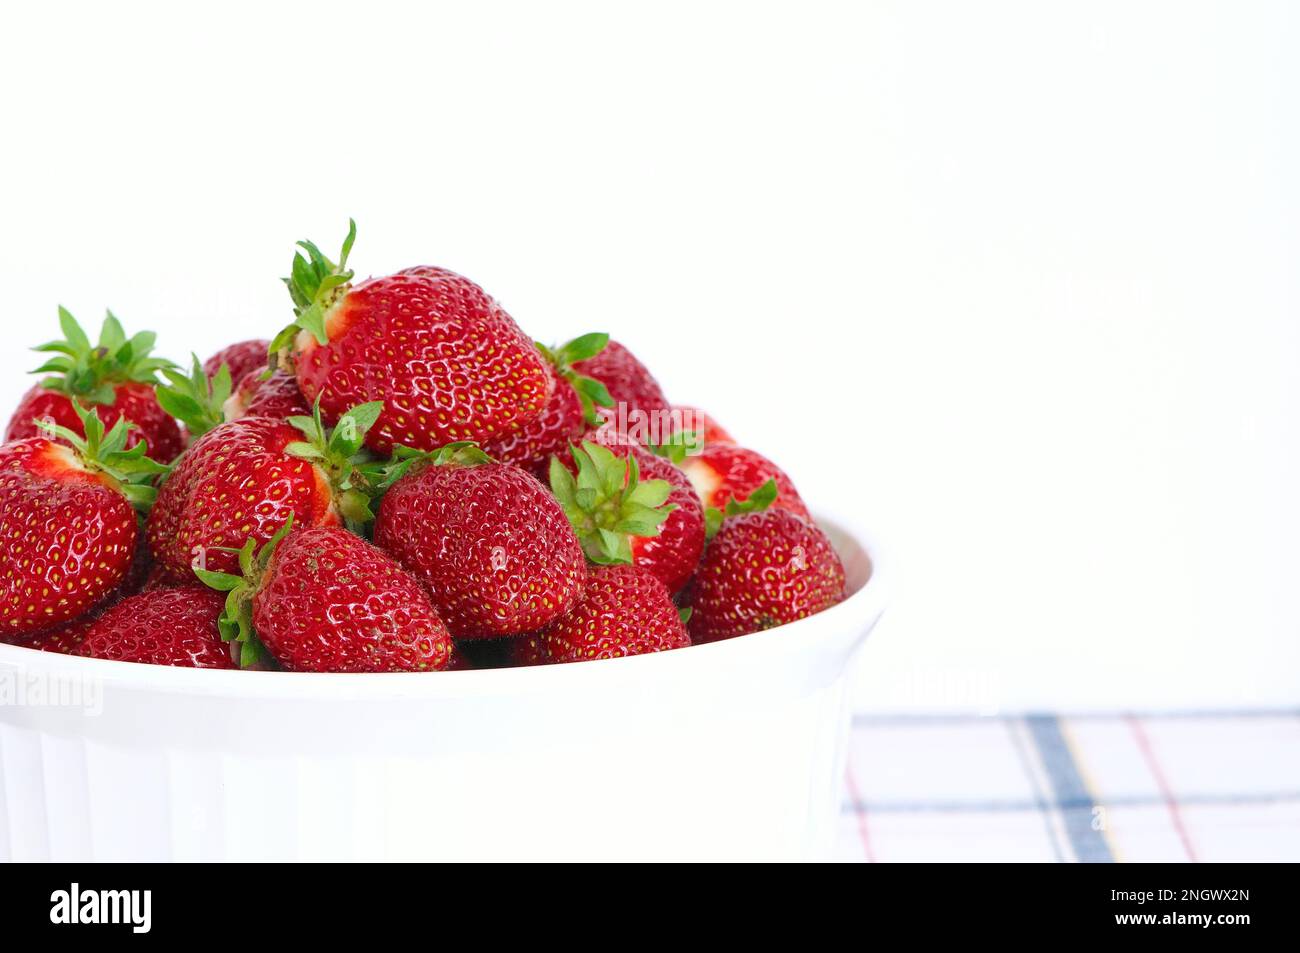 Fresh, whole ever-bearing strawberries (Fragaria x ananassa) in a white bowl on a blue plaid tablecloth with white background - copy space. Stock Photo